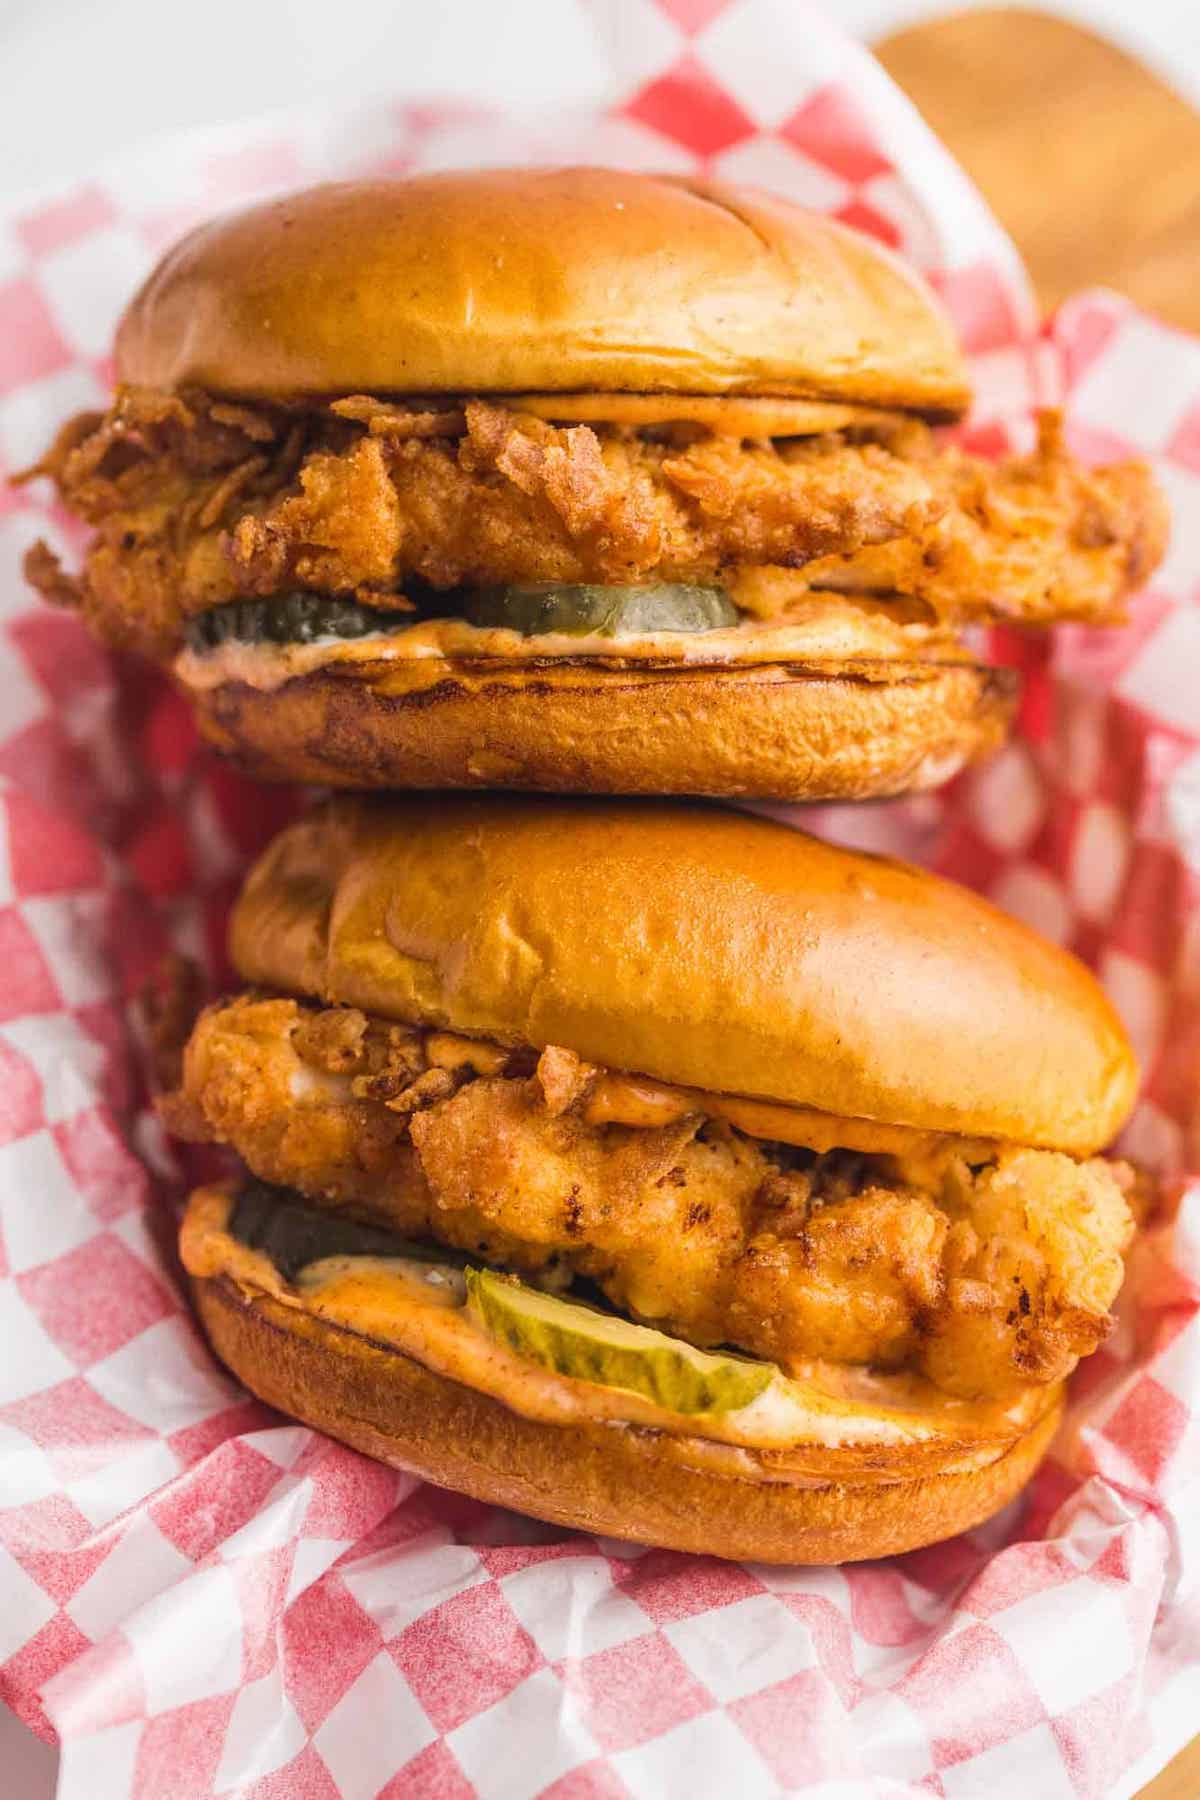 A food basket filled with homemade spicy chicken sandwiches with spicy mayo and pickles.